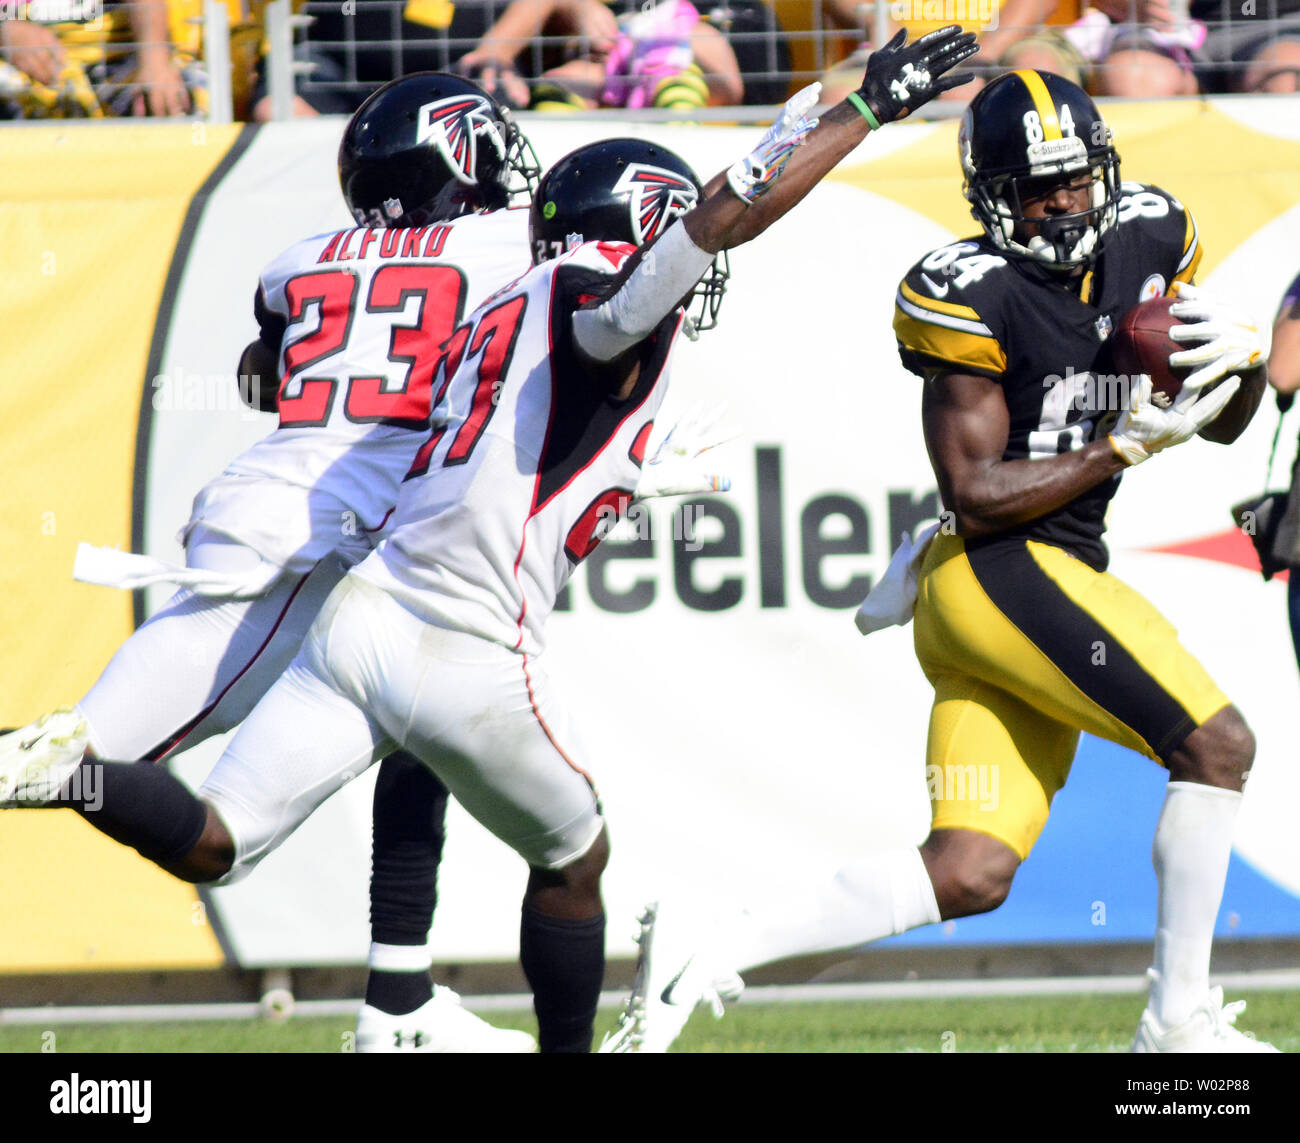 Pittsburgh Steelers wide receiver Antonio Brown (84) pulls in a 47 yard reception for a touchdown with Atlanta Falcons cornerback Robert Alford (23) and Atlanta Falcons strong safety Damontae Kazee (27) in coverage in the fourth quarter of the Steelers 41-17 win against the Atlanta Falcons at Heinz Field in Pittsburgh on October 7, 2018. Photo by Archie Carpenter/UPI Stock Photo